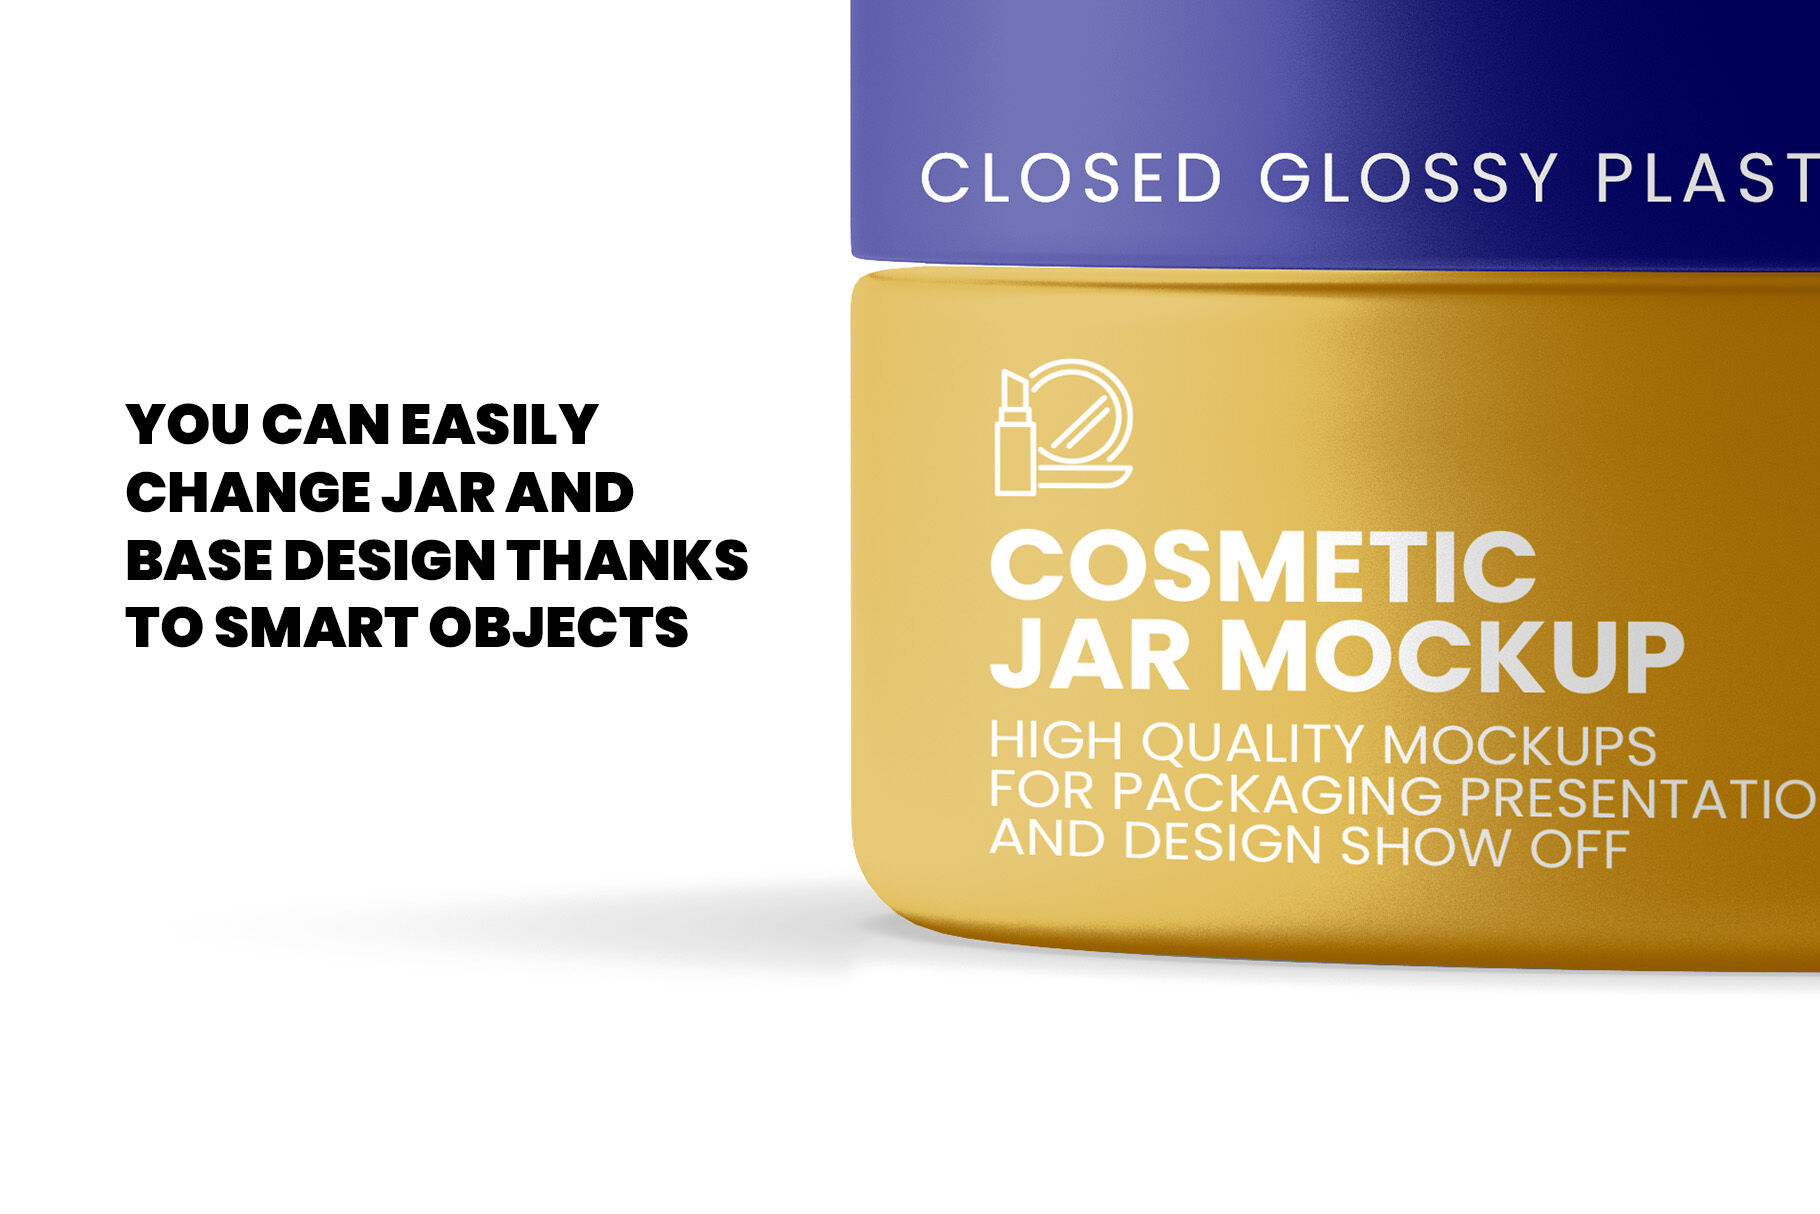 Download Closed Glossy Plastic Cosmetic Jar Mockup By Illusiongraphic Thehungryjpeg Com PSD Mockup Templates